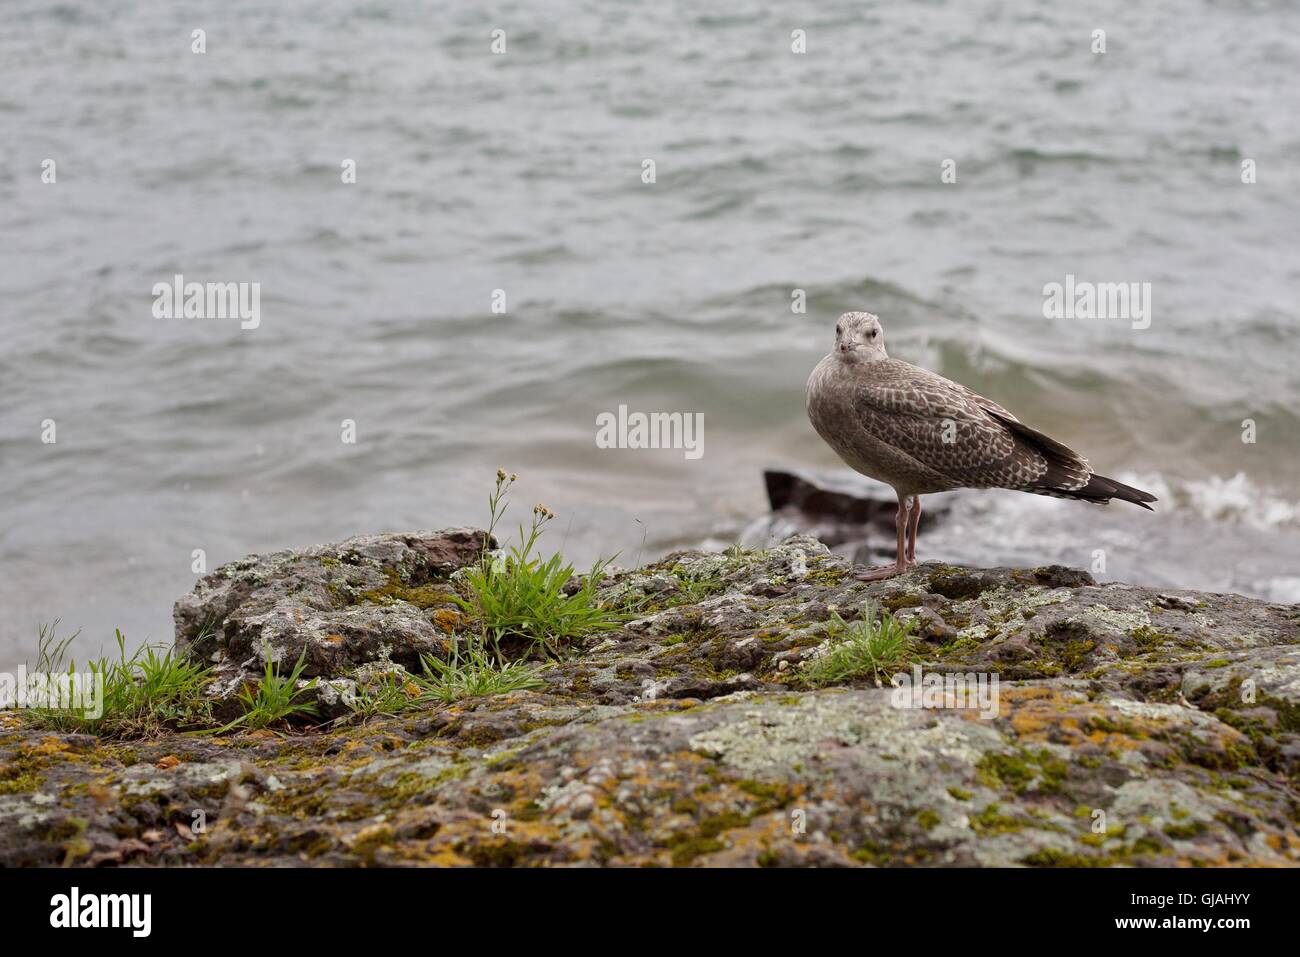 A young herring gull on the shore of Lake Superior in Minnesota, USA. Stock Photo